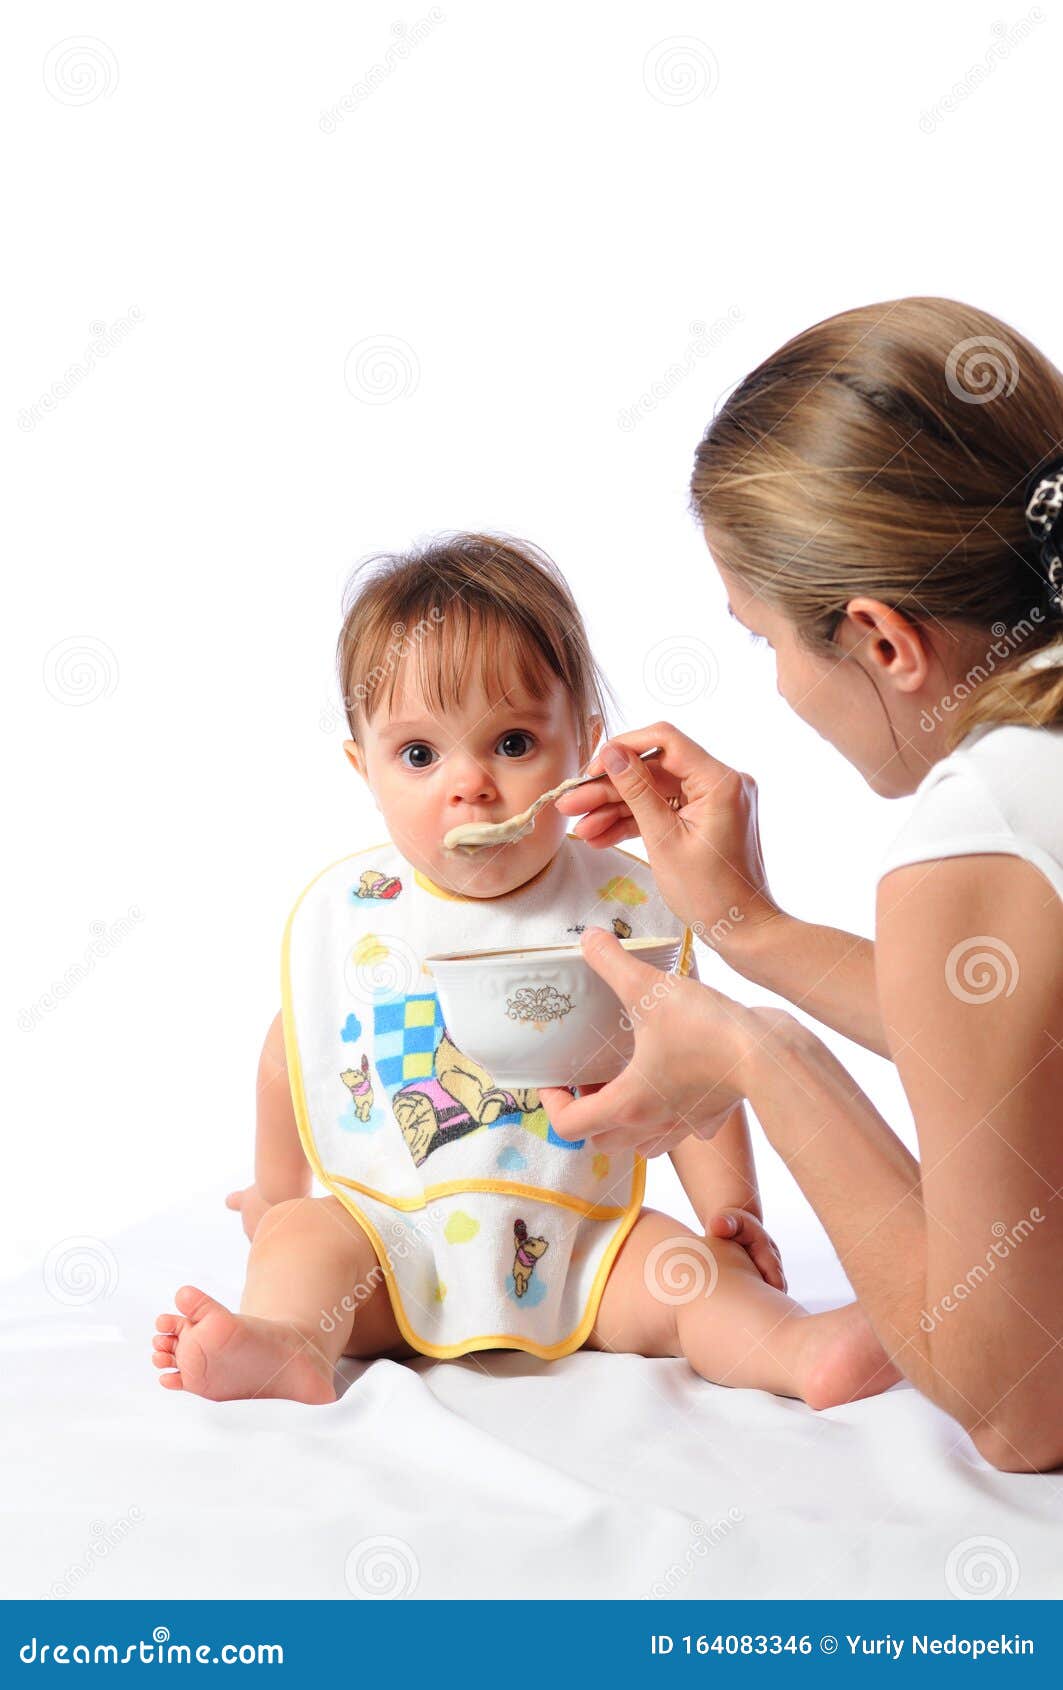 Feeding both babes with one stuff